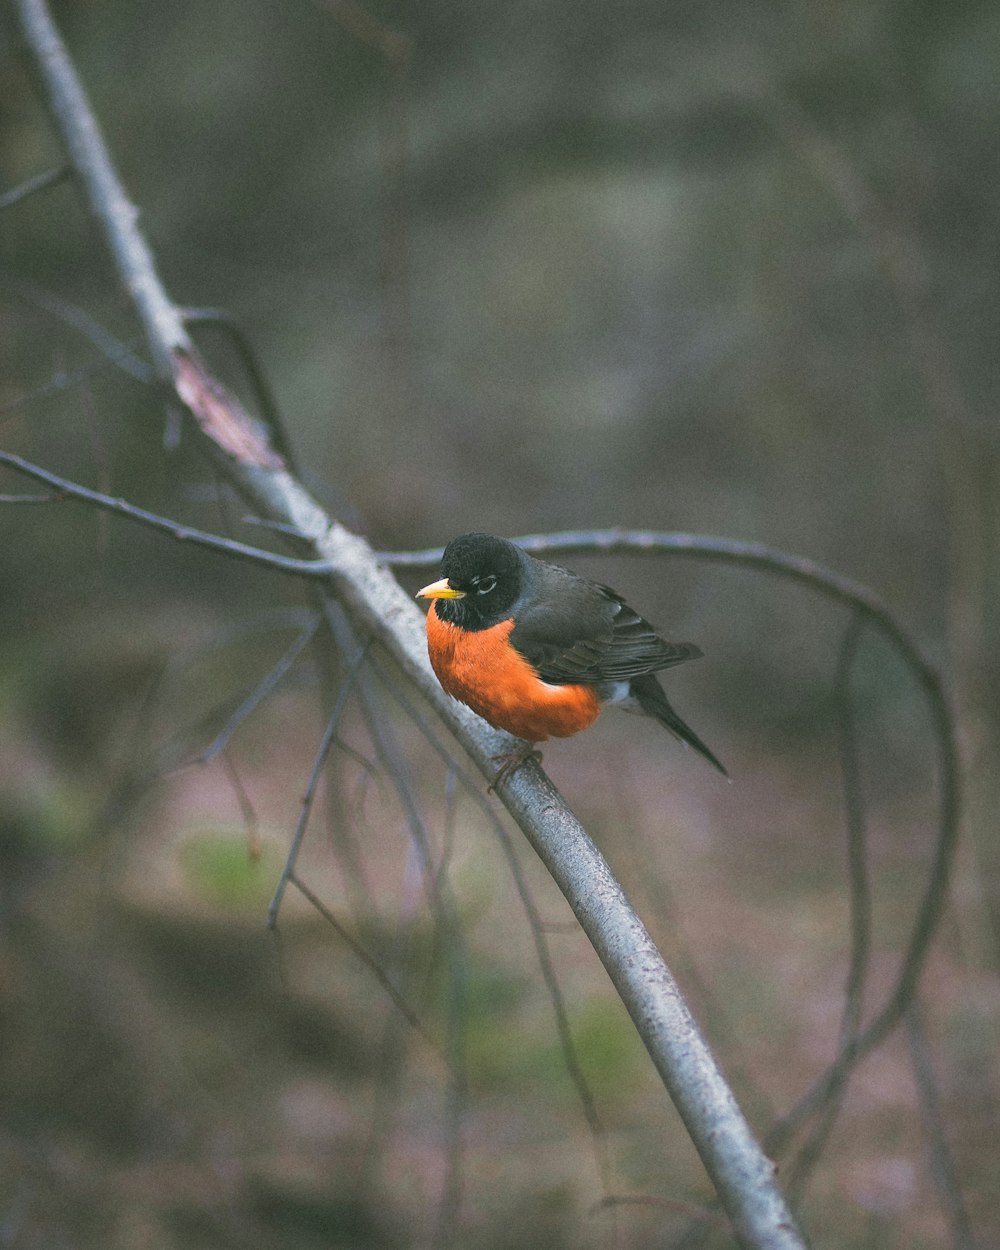 a small orange and black bird perched on a tree branch